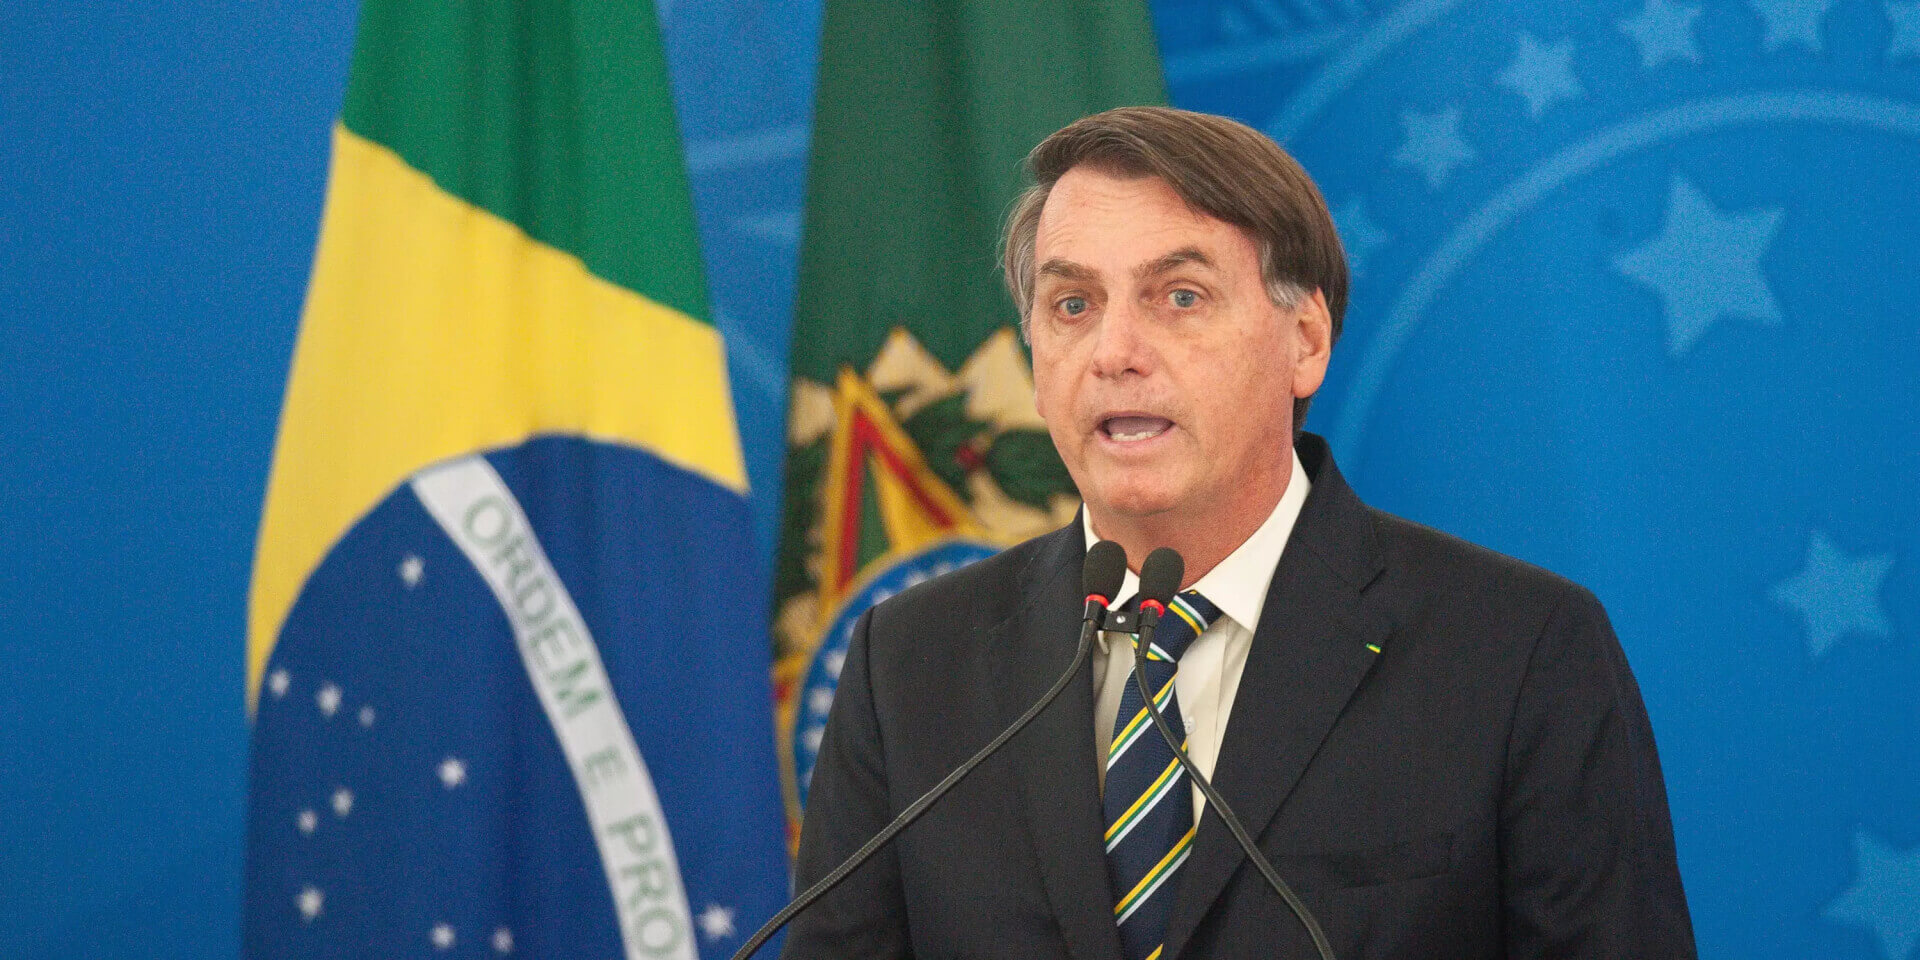 Brazilian President Leads Yet Another Anti-Lockdown Protest